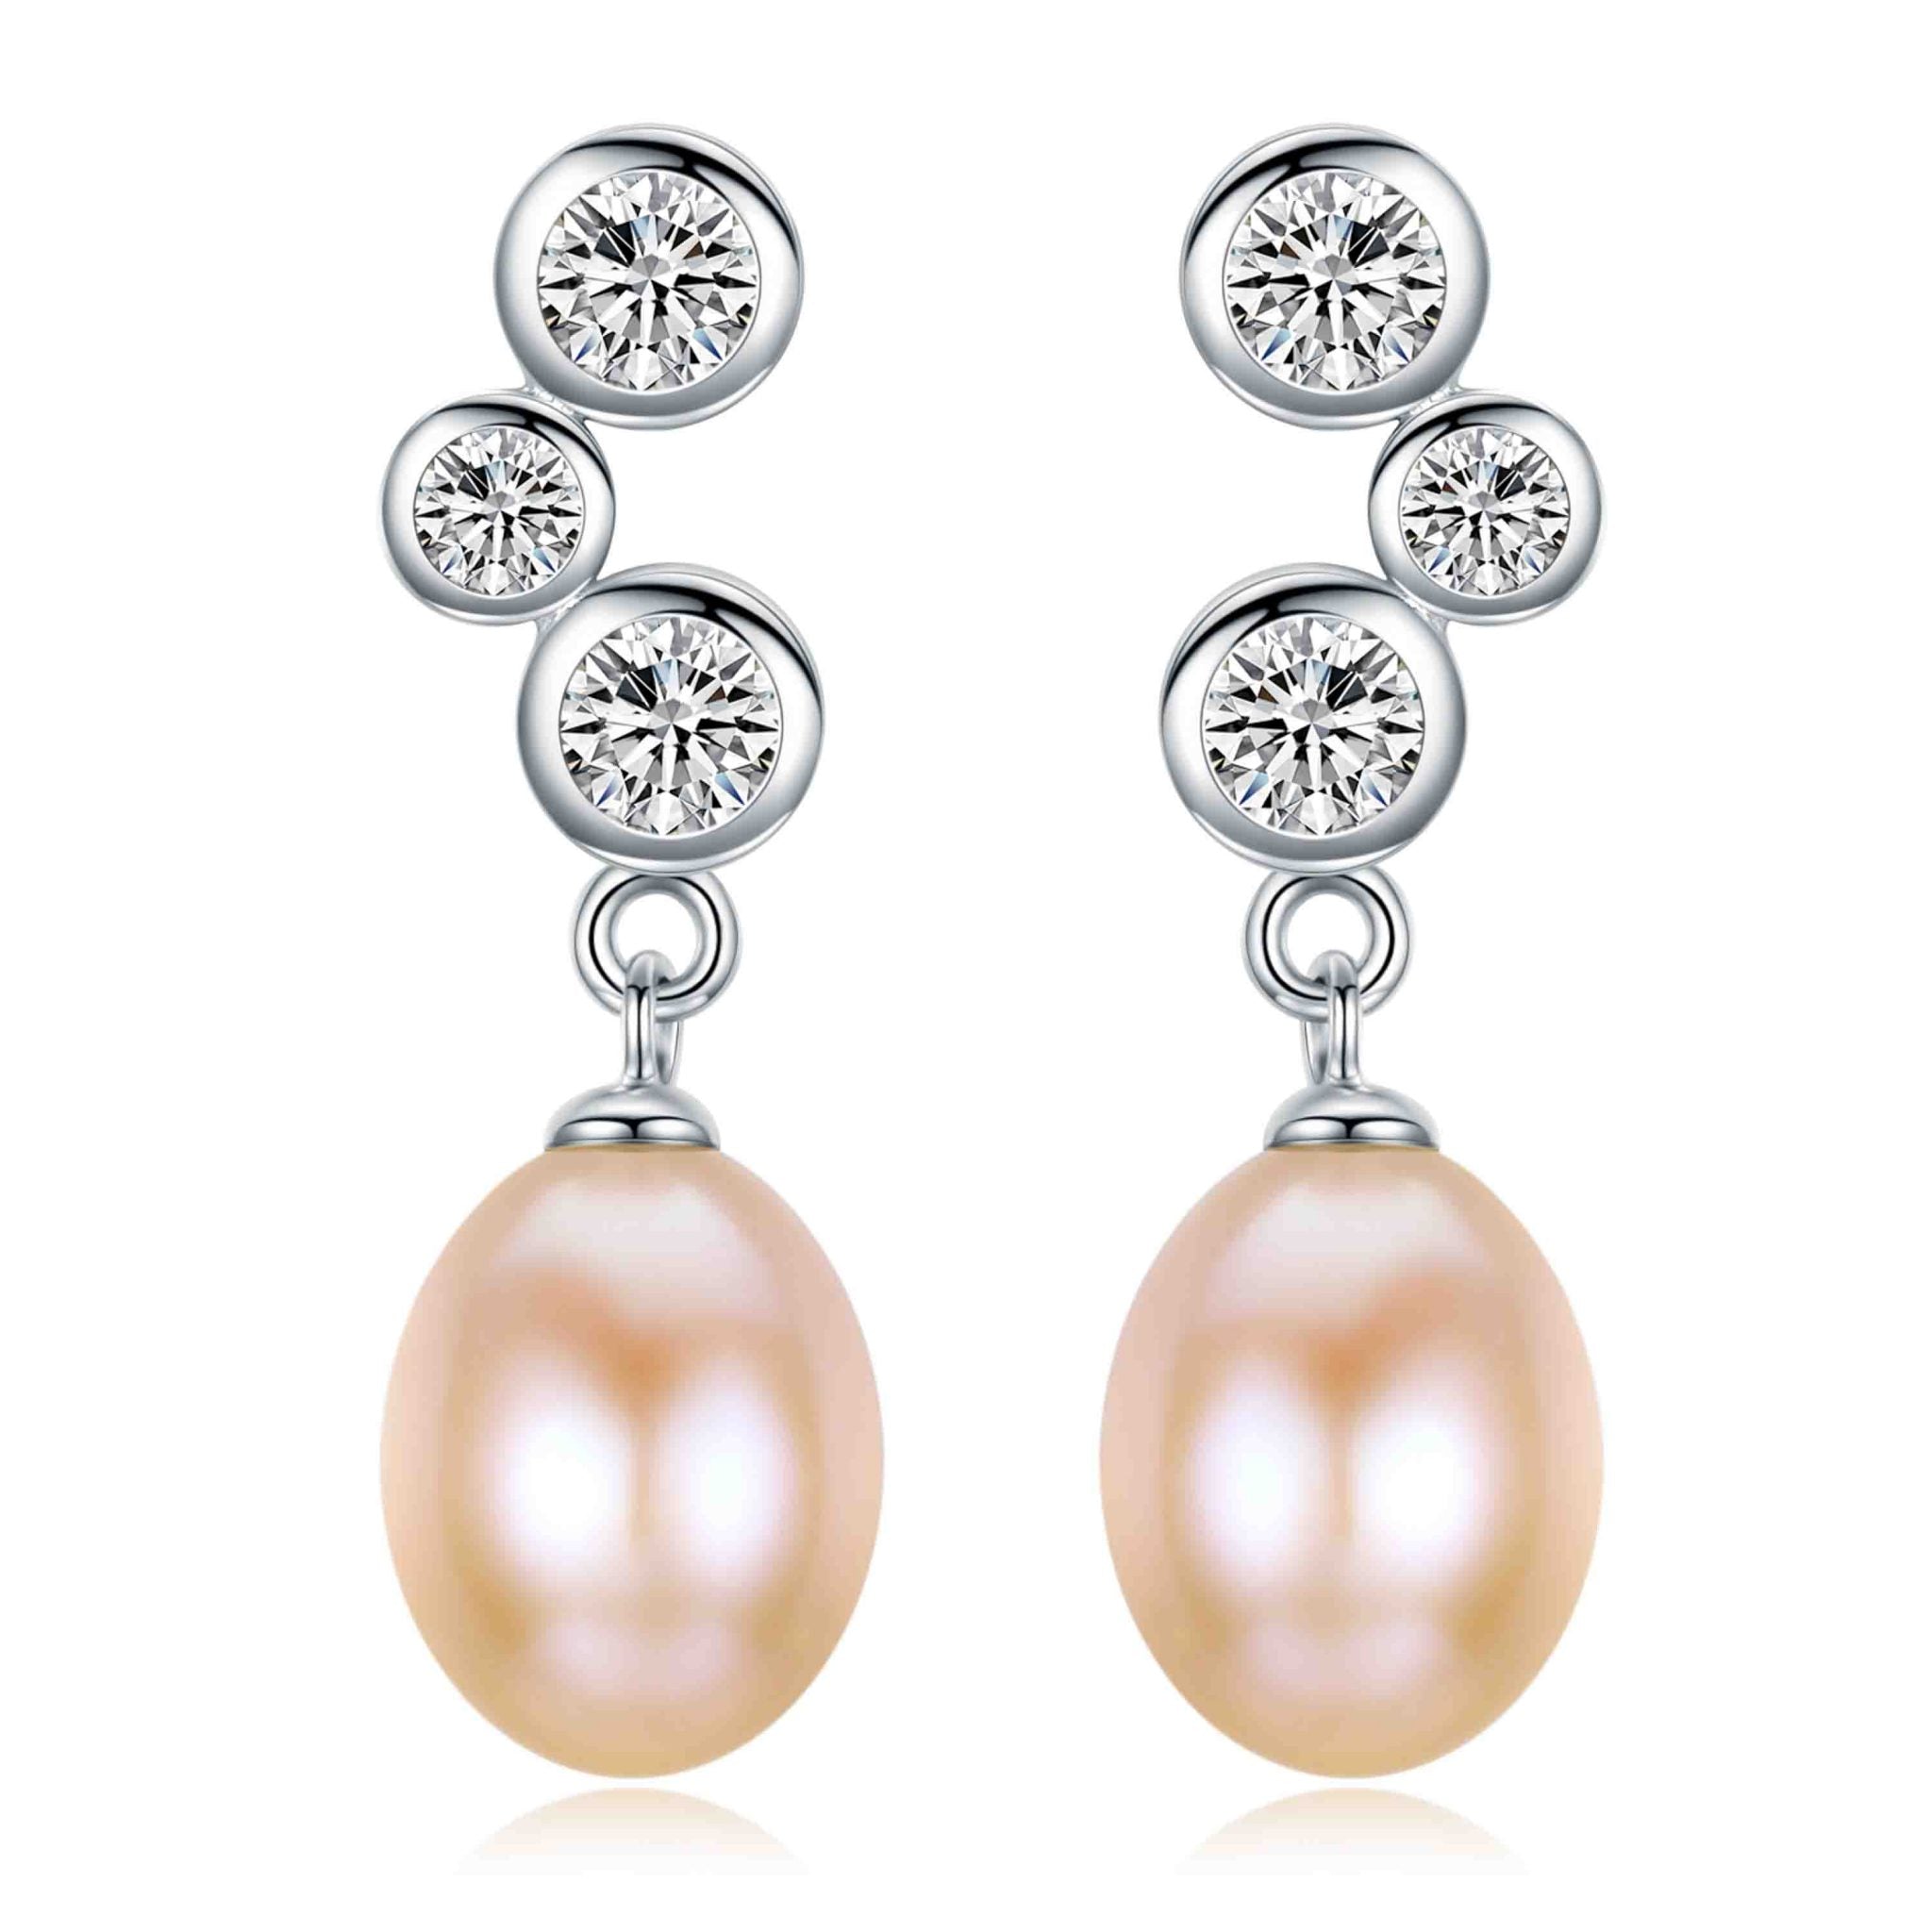 Solid Eternal Collection 7.5-8.0 mm Pink Freshadama Pearl Earrings 14K Yellow Gold by Pearl Paradise